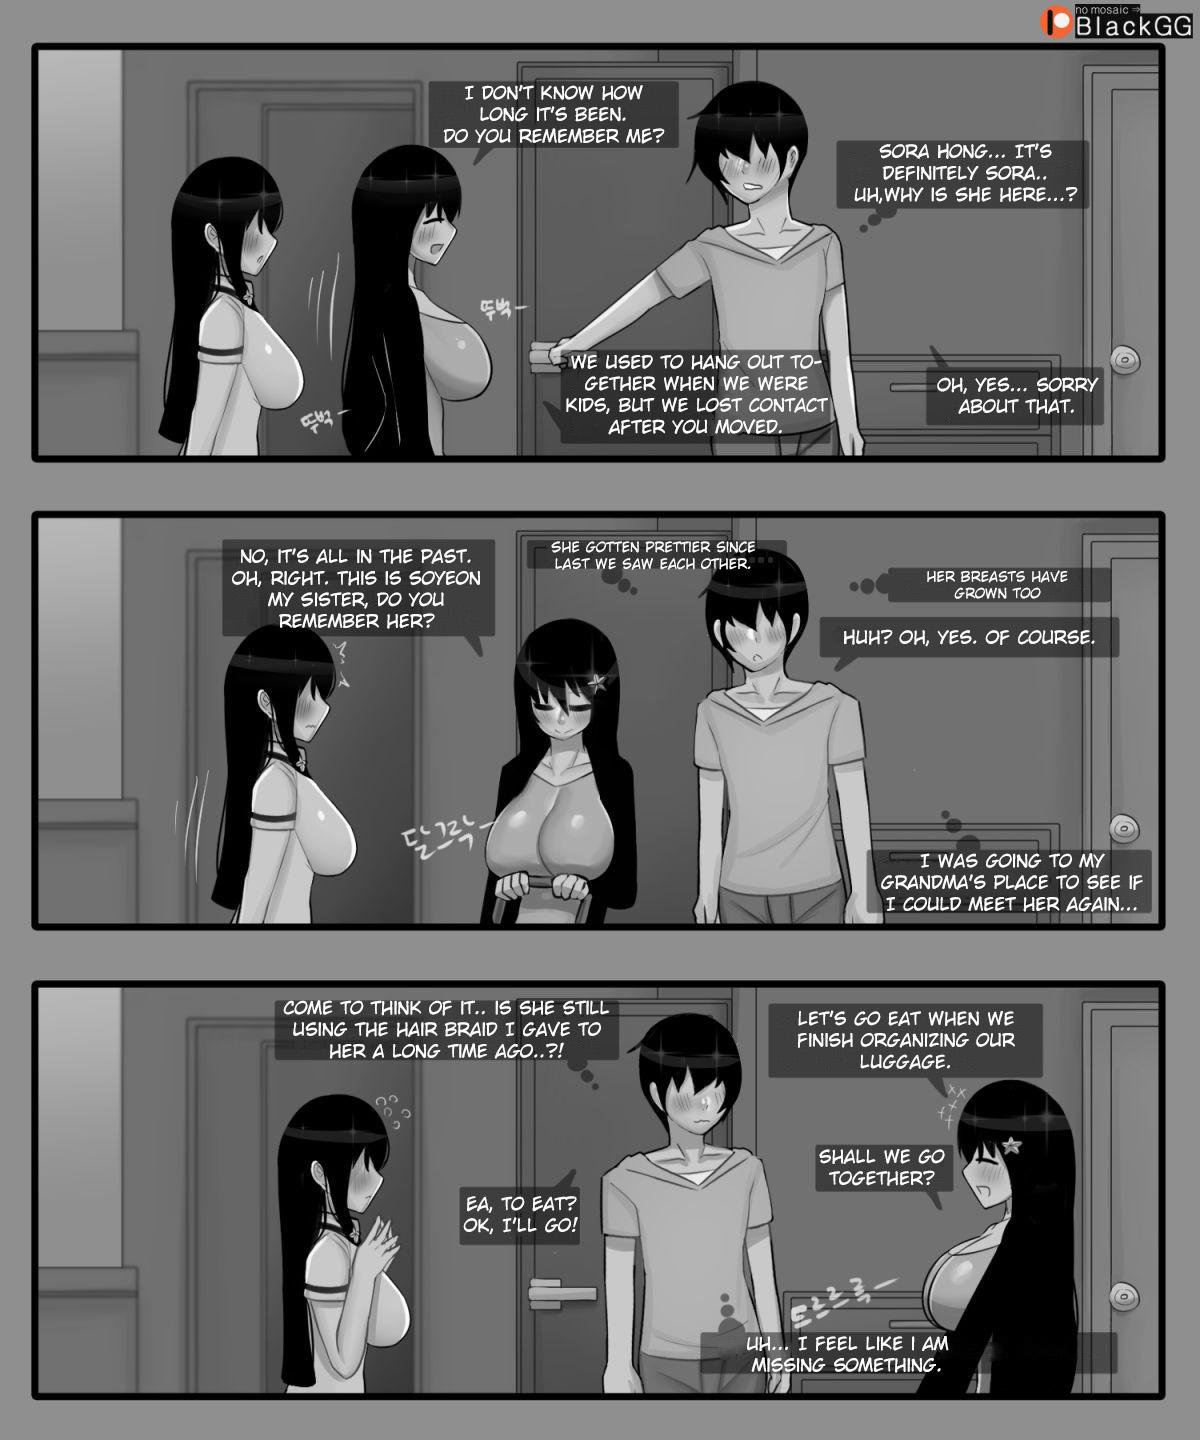 Desi The story of a childhood friend becoming father's lover 1 - Original Pain - Page 7